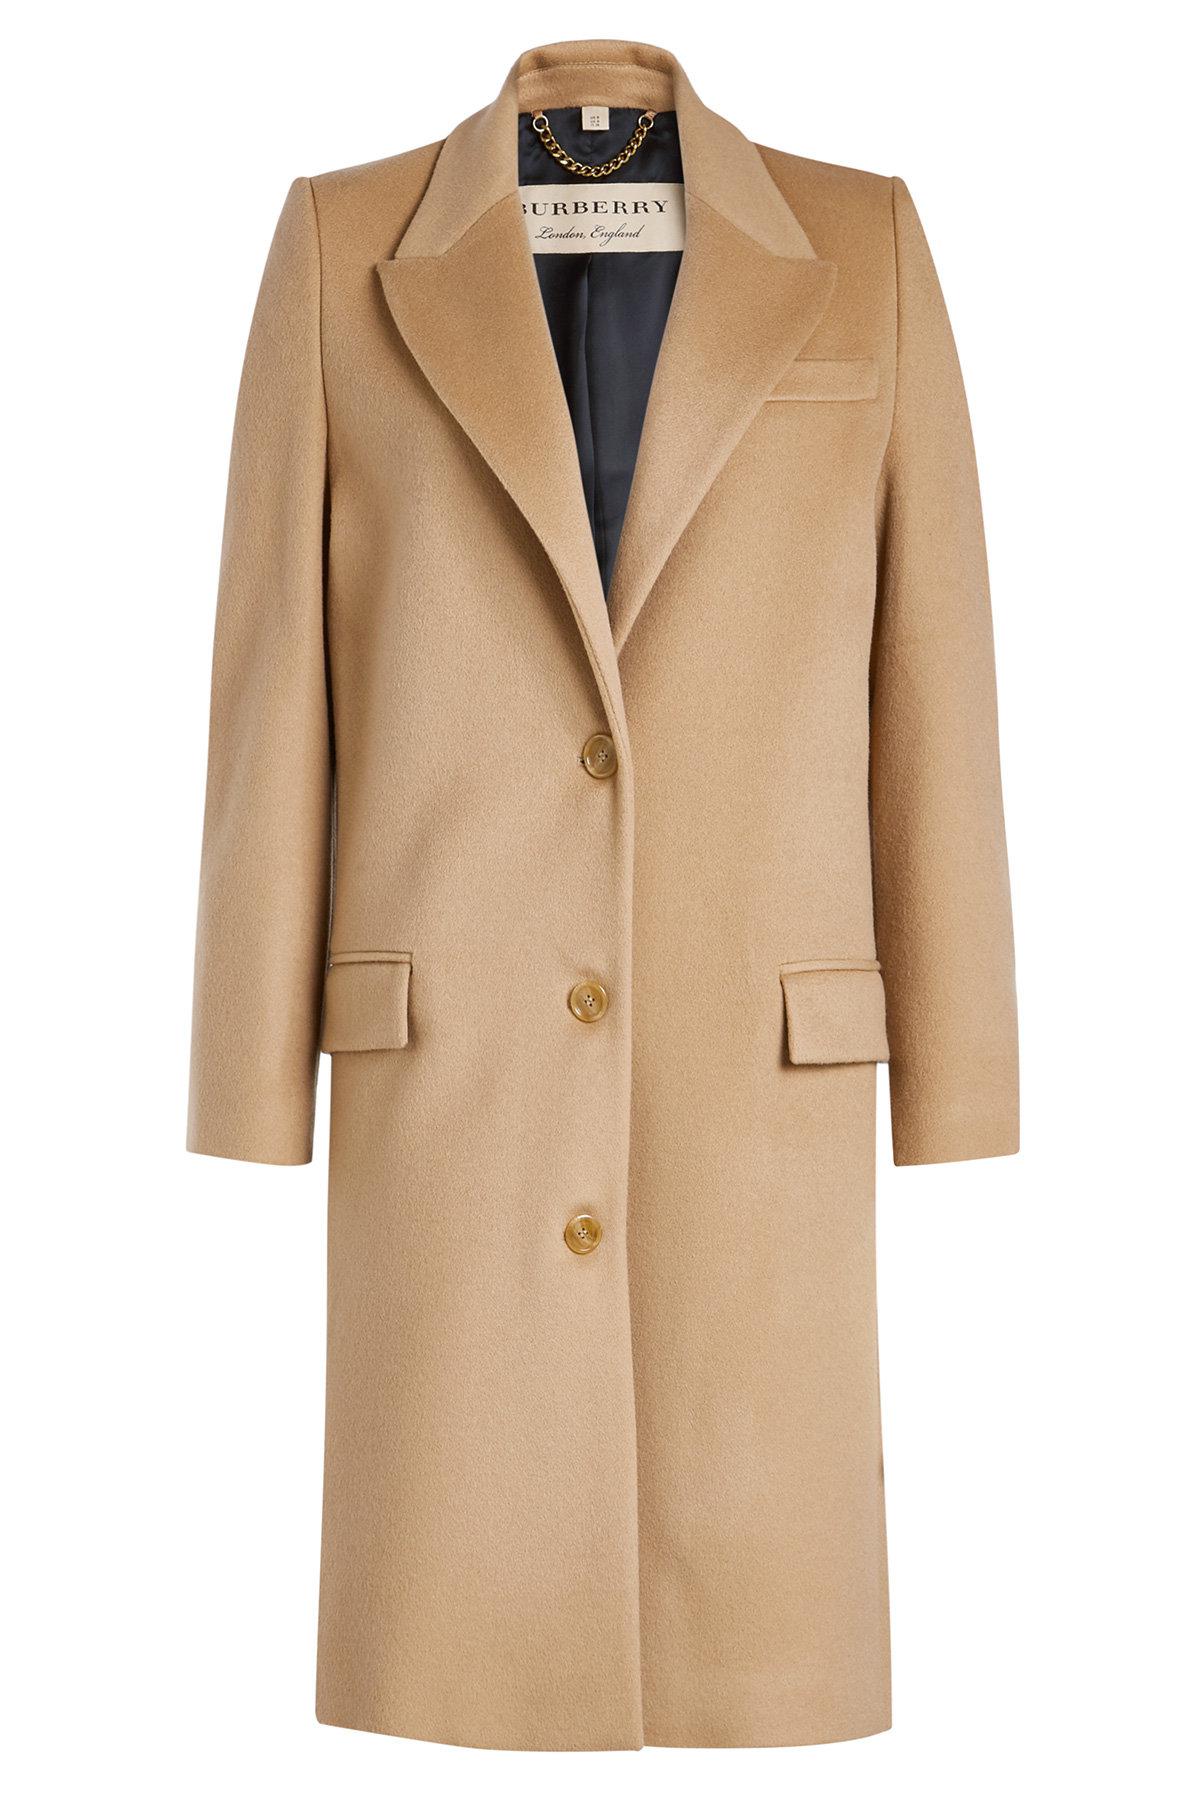 Lyst - Burberry Fellhurst Wool Coat With Cashmere in Natural